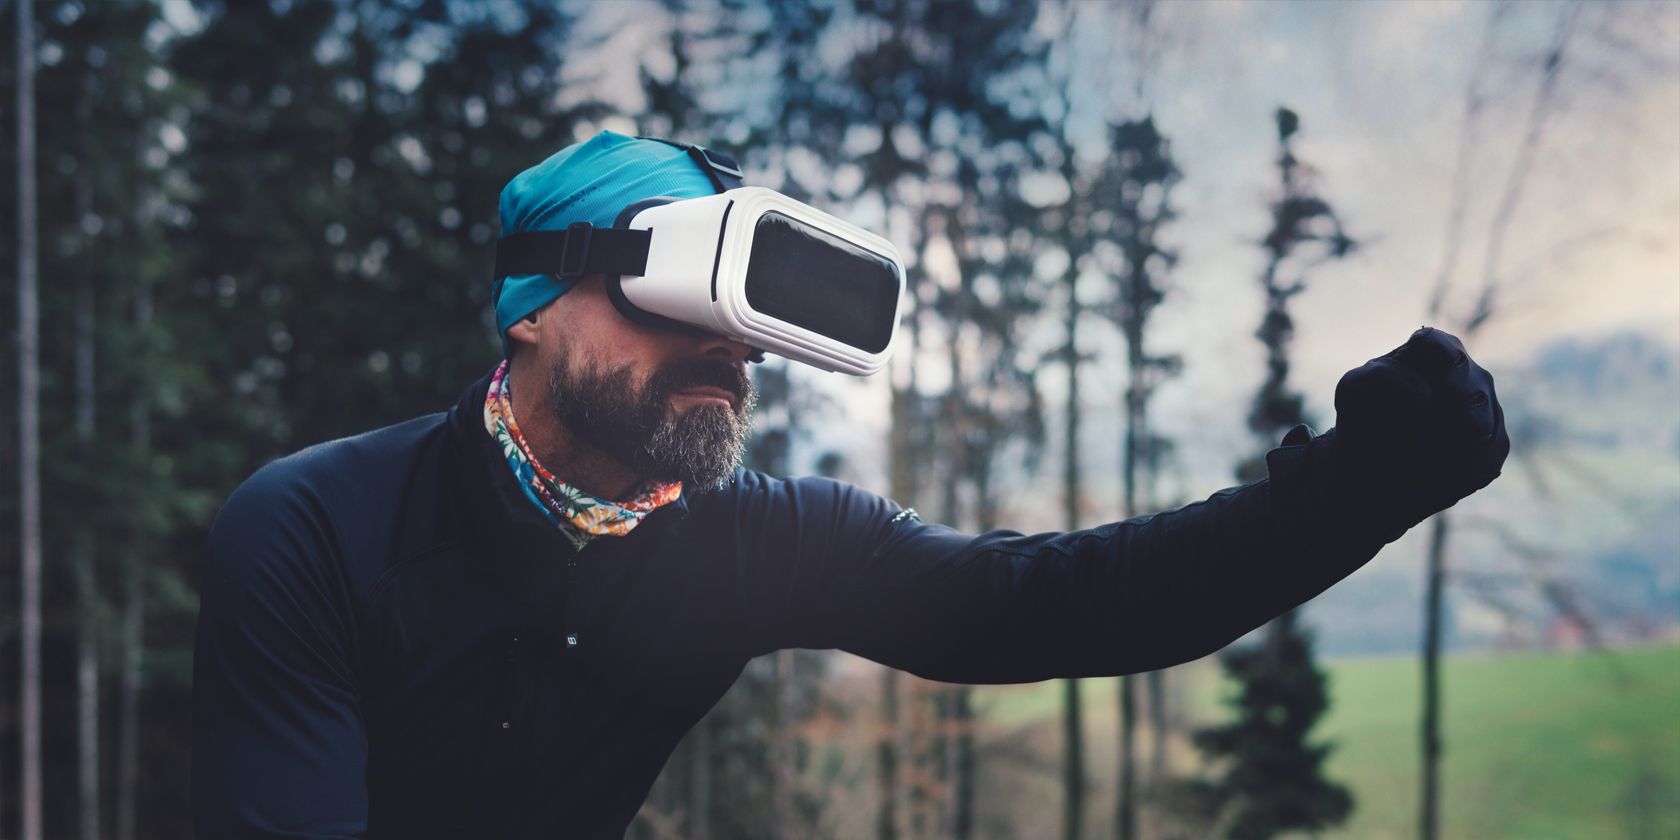 smartphone vr gaming outdoors